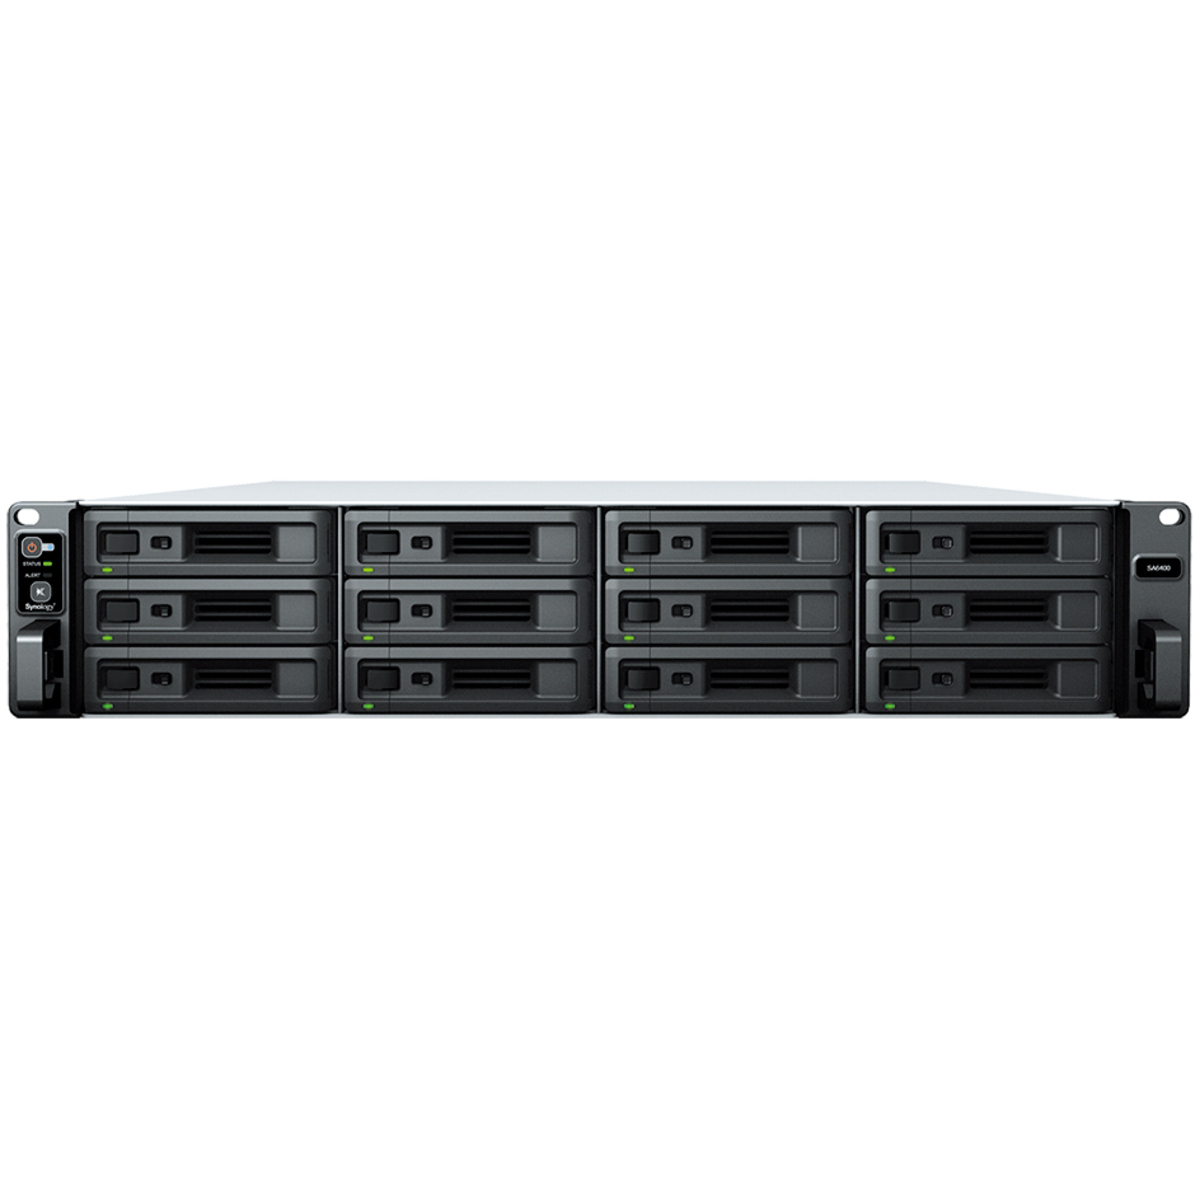 Synology RackStation SA6400 144tb 12-Bay RackMount Large Business / Enterprise NAS - Network Attached Storage Device 8x18tb Western Digital Ultrastar DC HC550 WUH721818ALE6L4 3.5 7200rpm SATA 6Gb/s HDD ENTERPRISE Class Drives Installed - Burn-In Tested RackStation SA6400